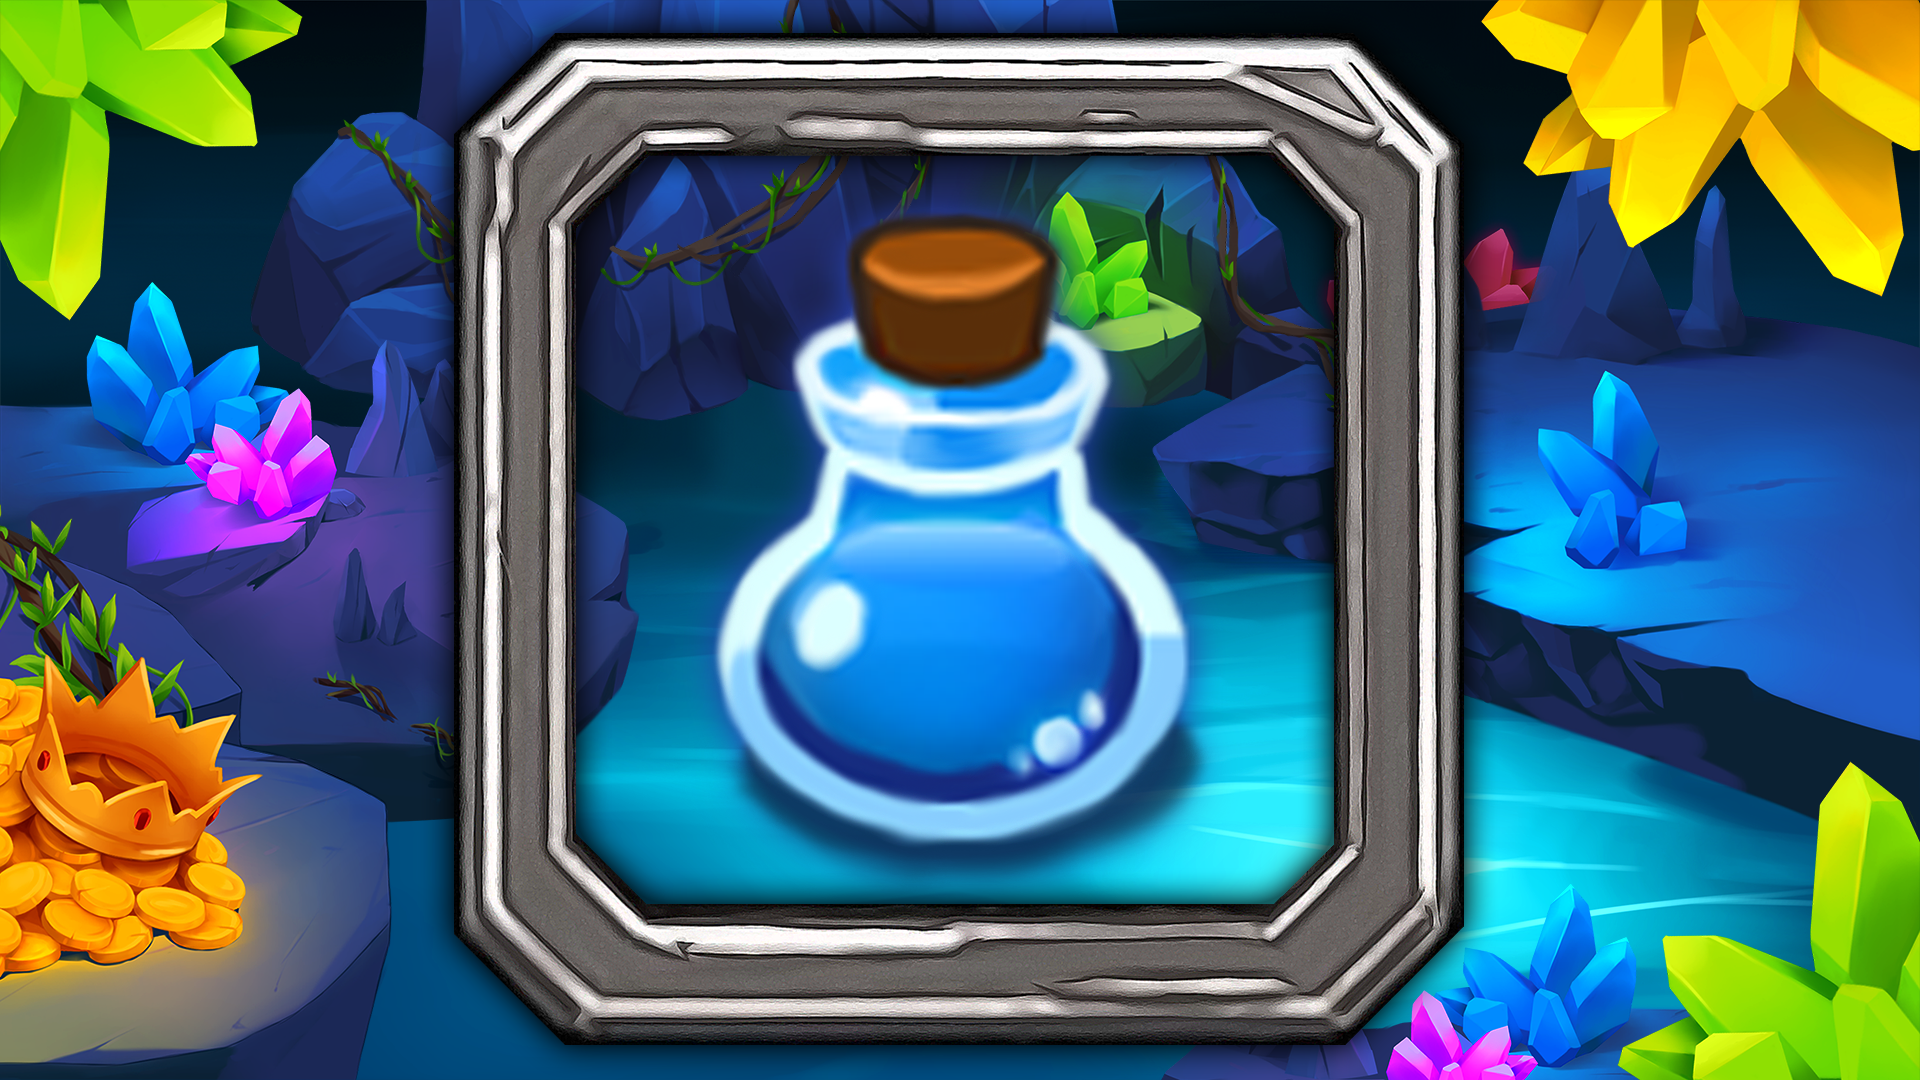 Icon for Bank of essence